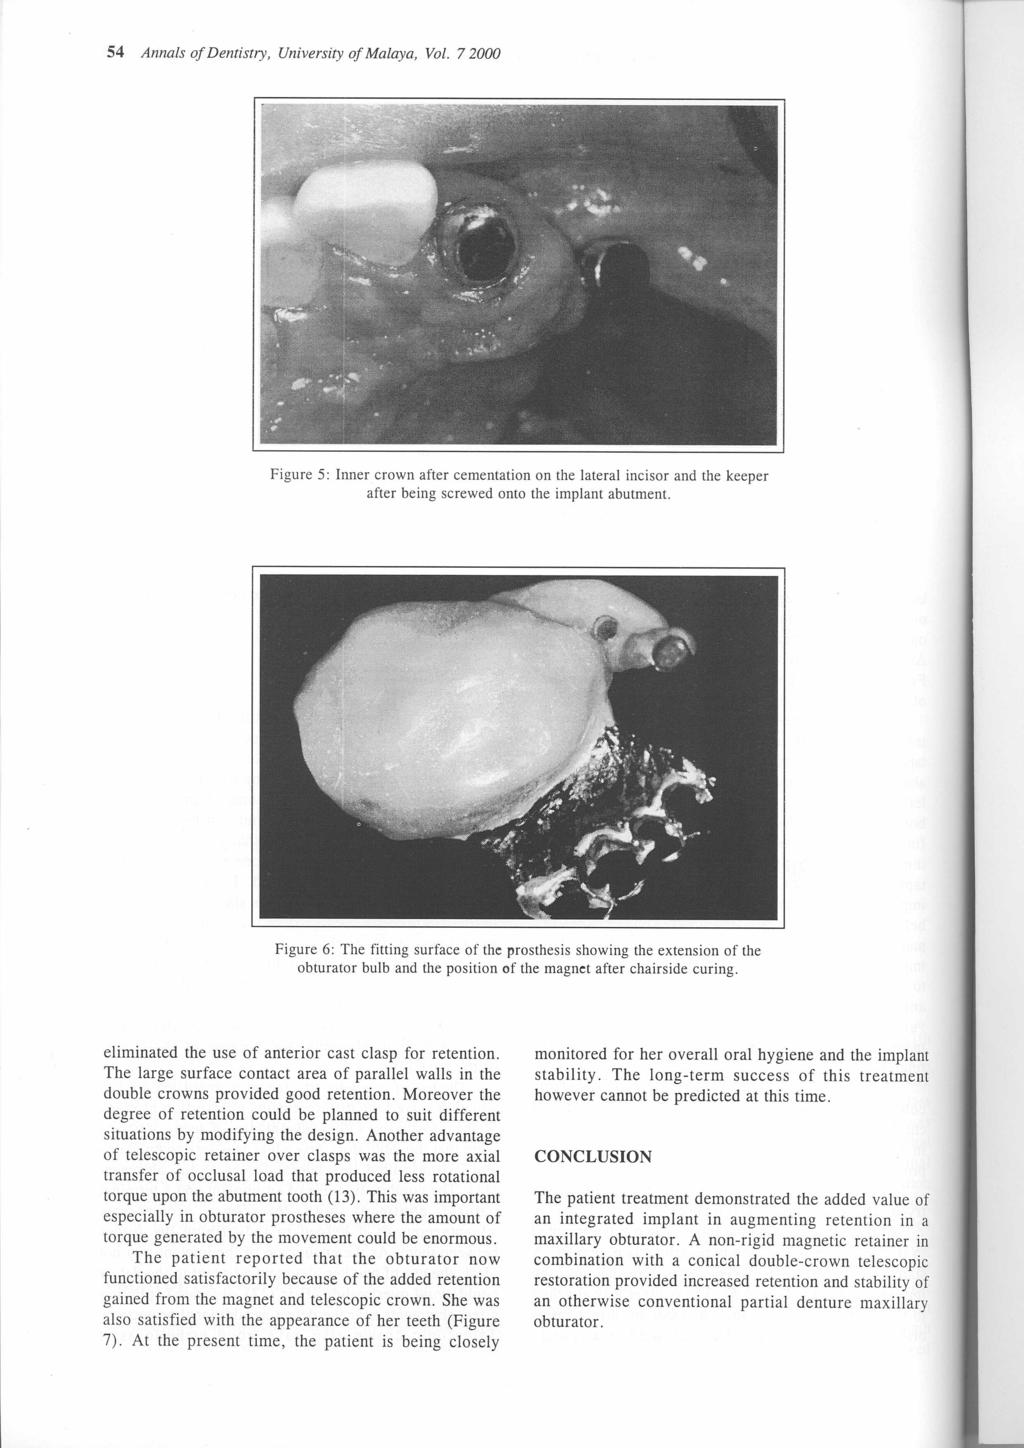 54 Annals of Dentistry, University of Malaya, Vol. 72000 Figure 5: Inner crown after cementation on the lateral incisor and the keeper after being screwed onto the implant abutment.